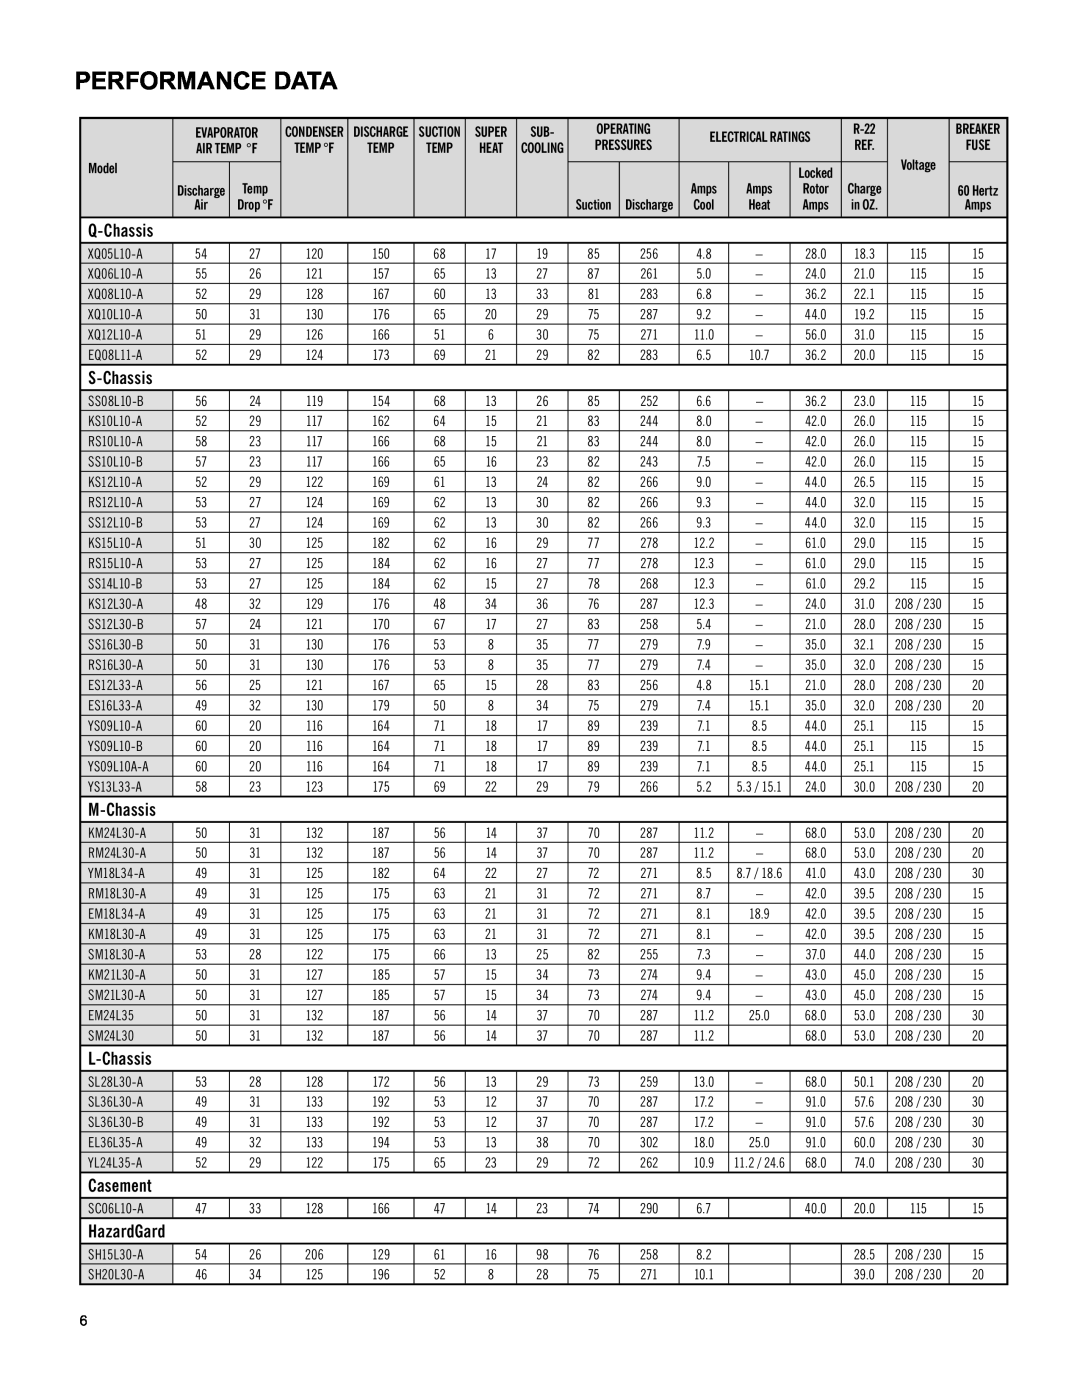 Friedrich RAC-SVC-06 service manual Performance Data, Q-Chassis, S-Chassis, M-Chassis, L-Chassis, Casement, HazardGard 